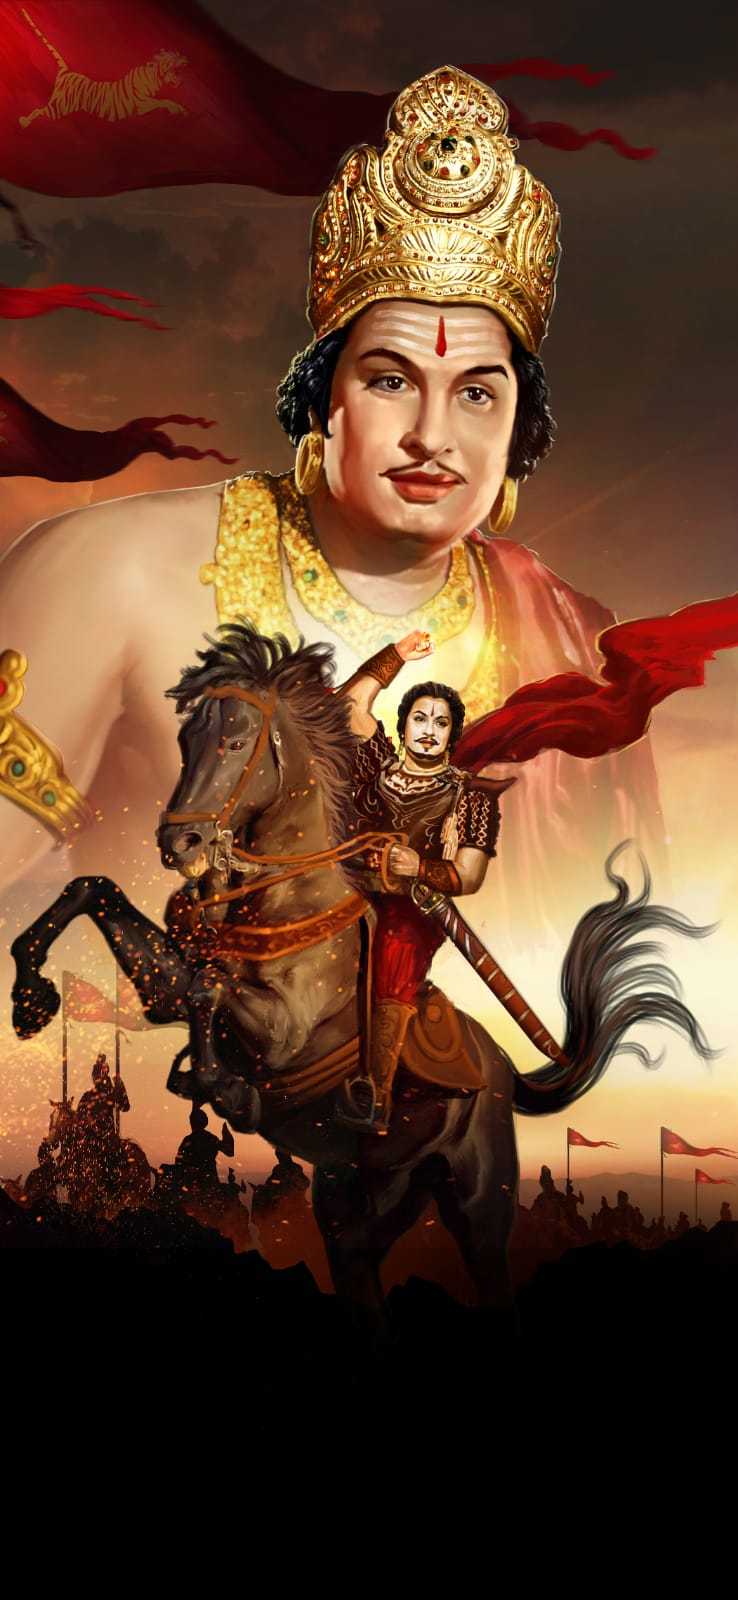 MGR's dream Ponniyin Selvan is all set to be made as a movie